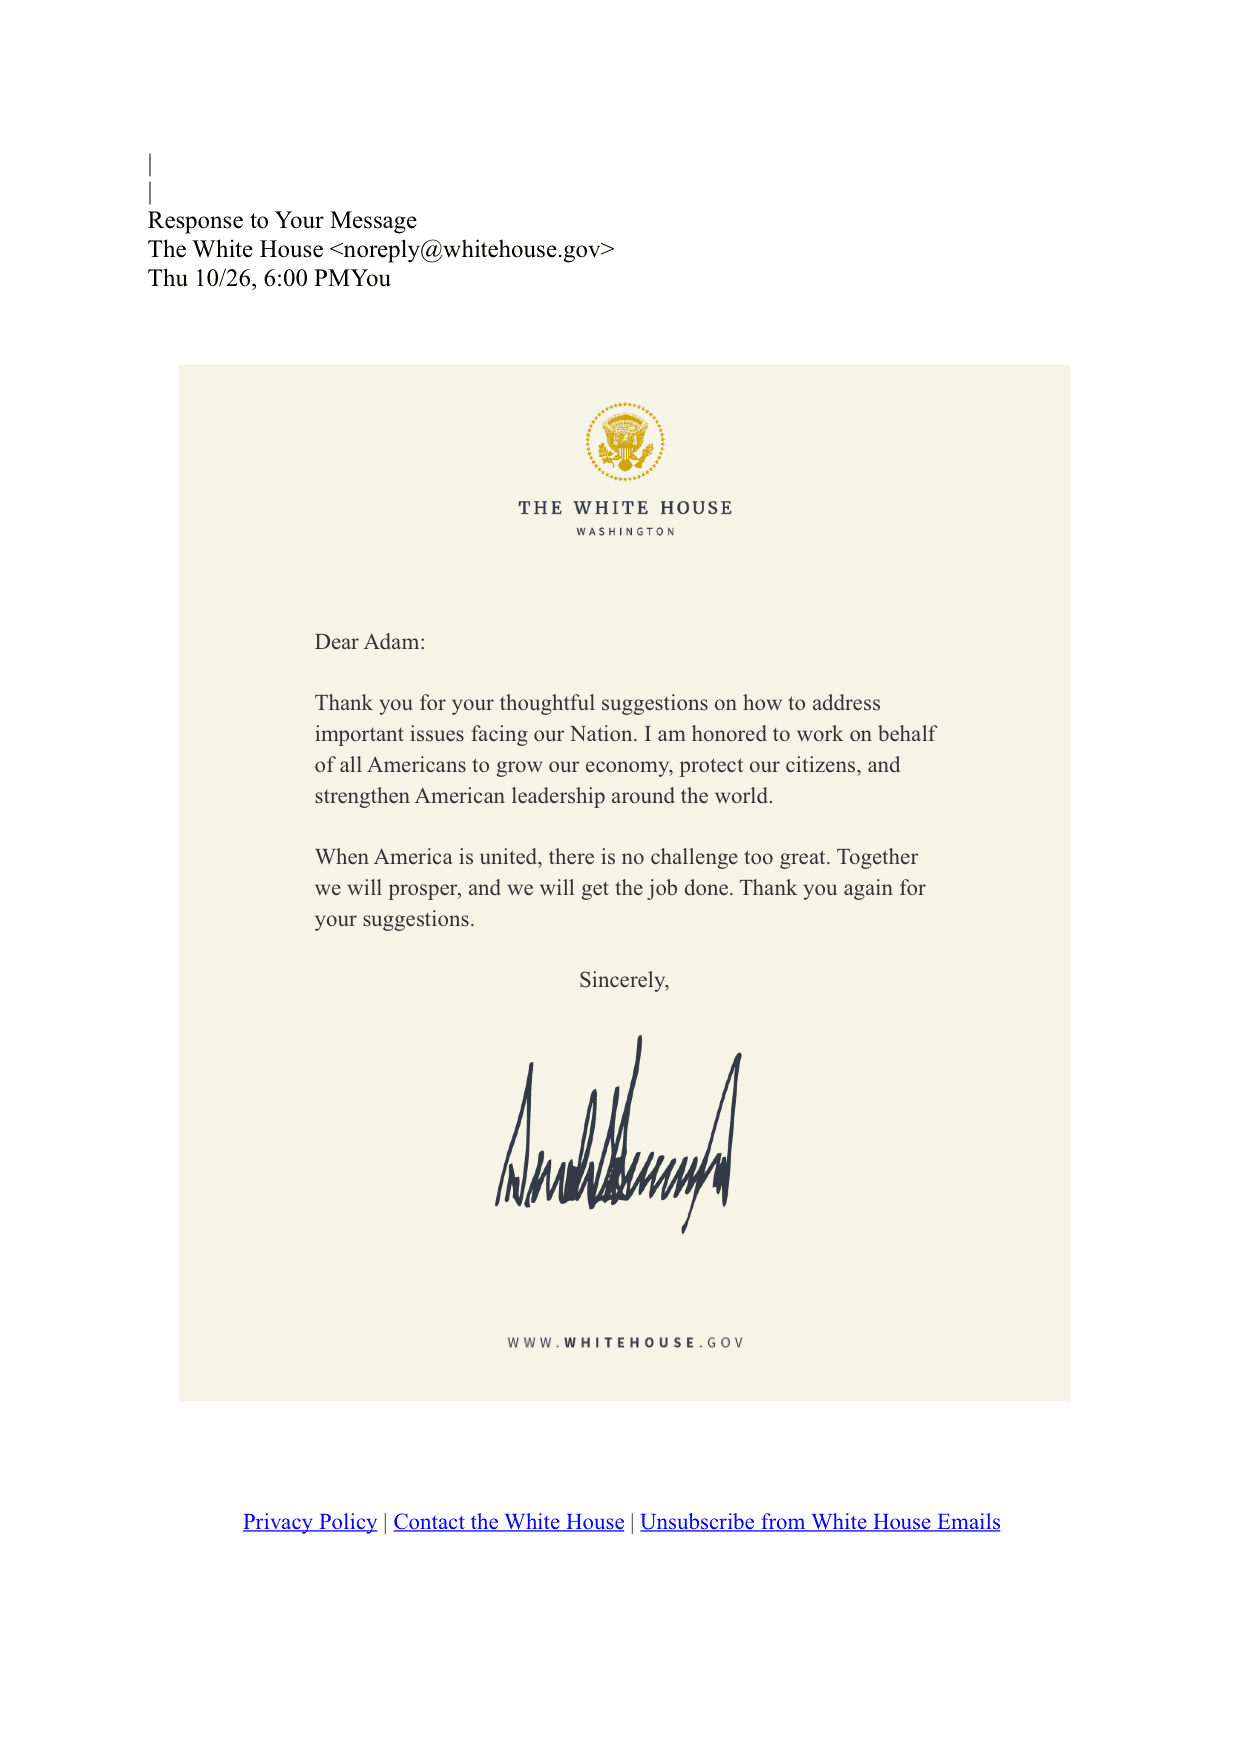 Response-to-Your-Message-from-D.-Trump